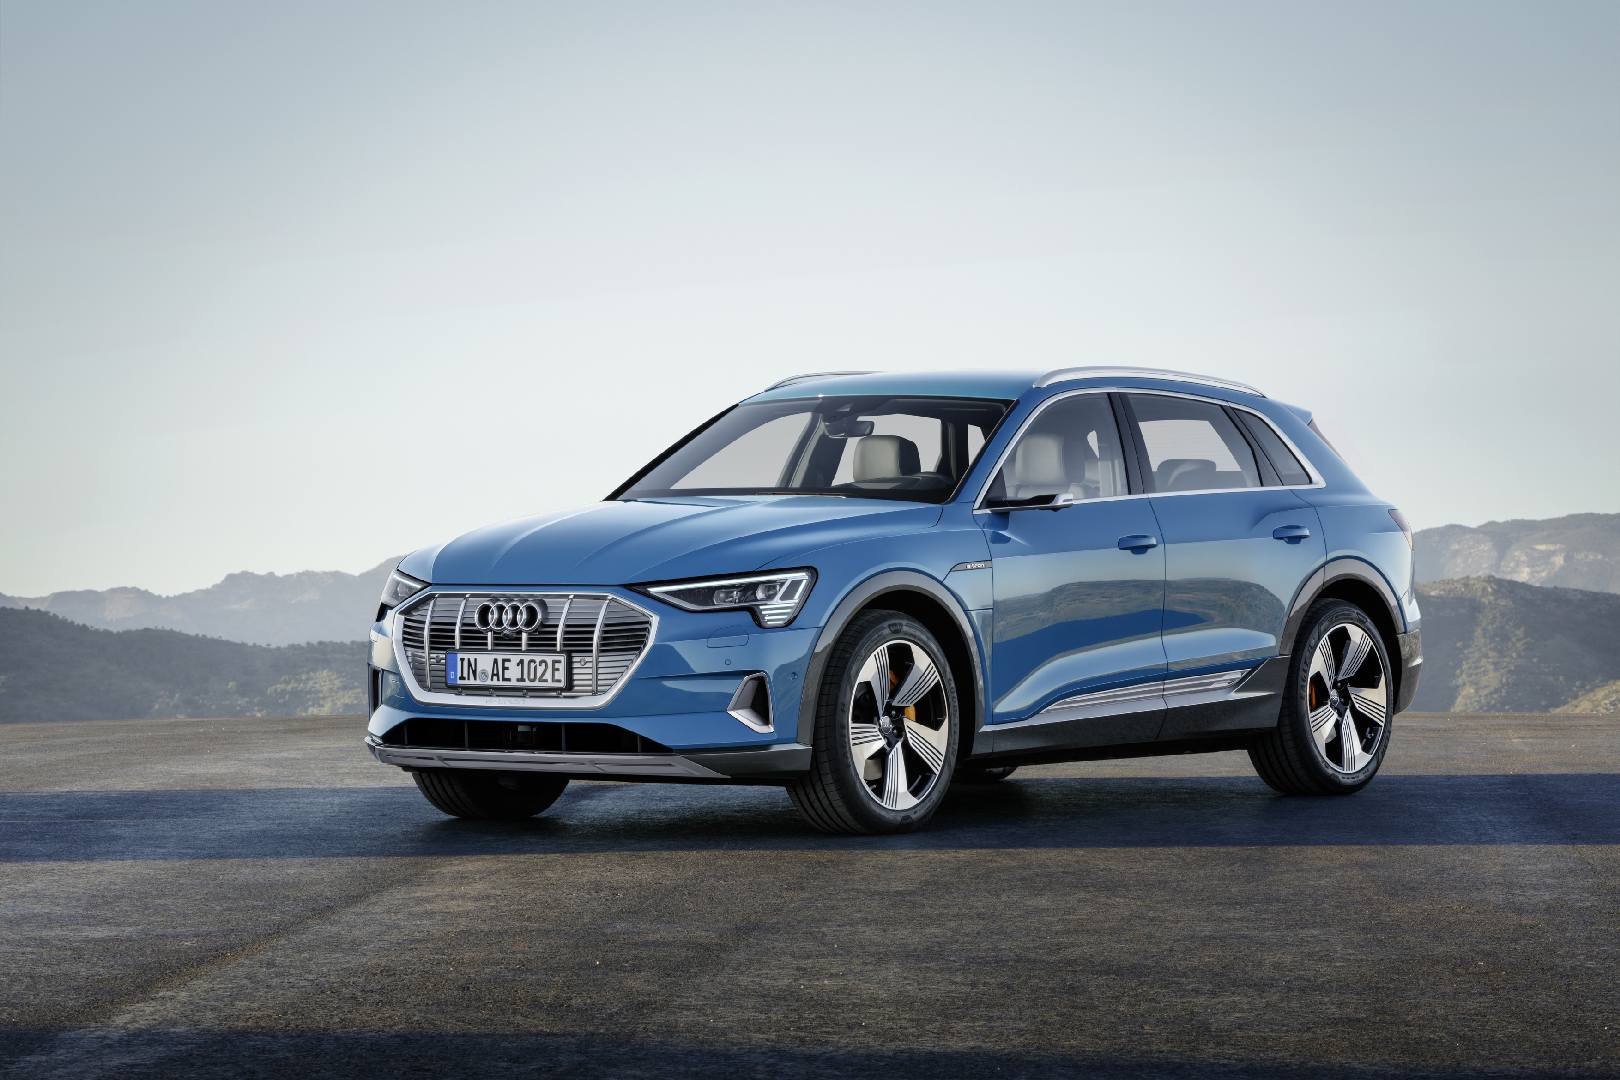 2019 Audi e-tron: First Electric SUV from Audi Revealed ...